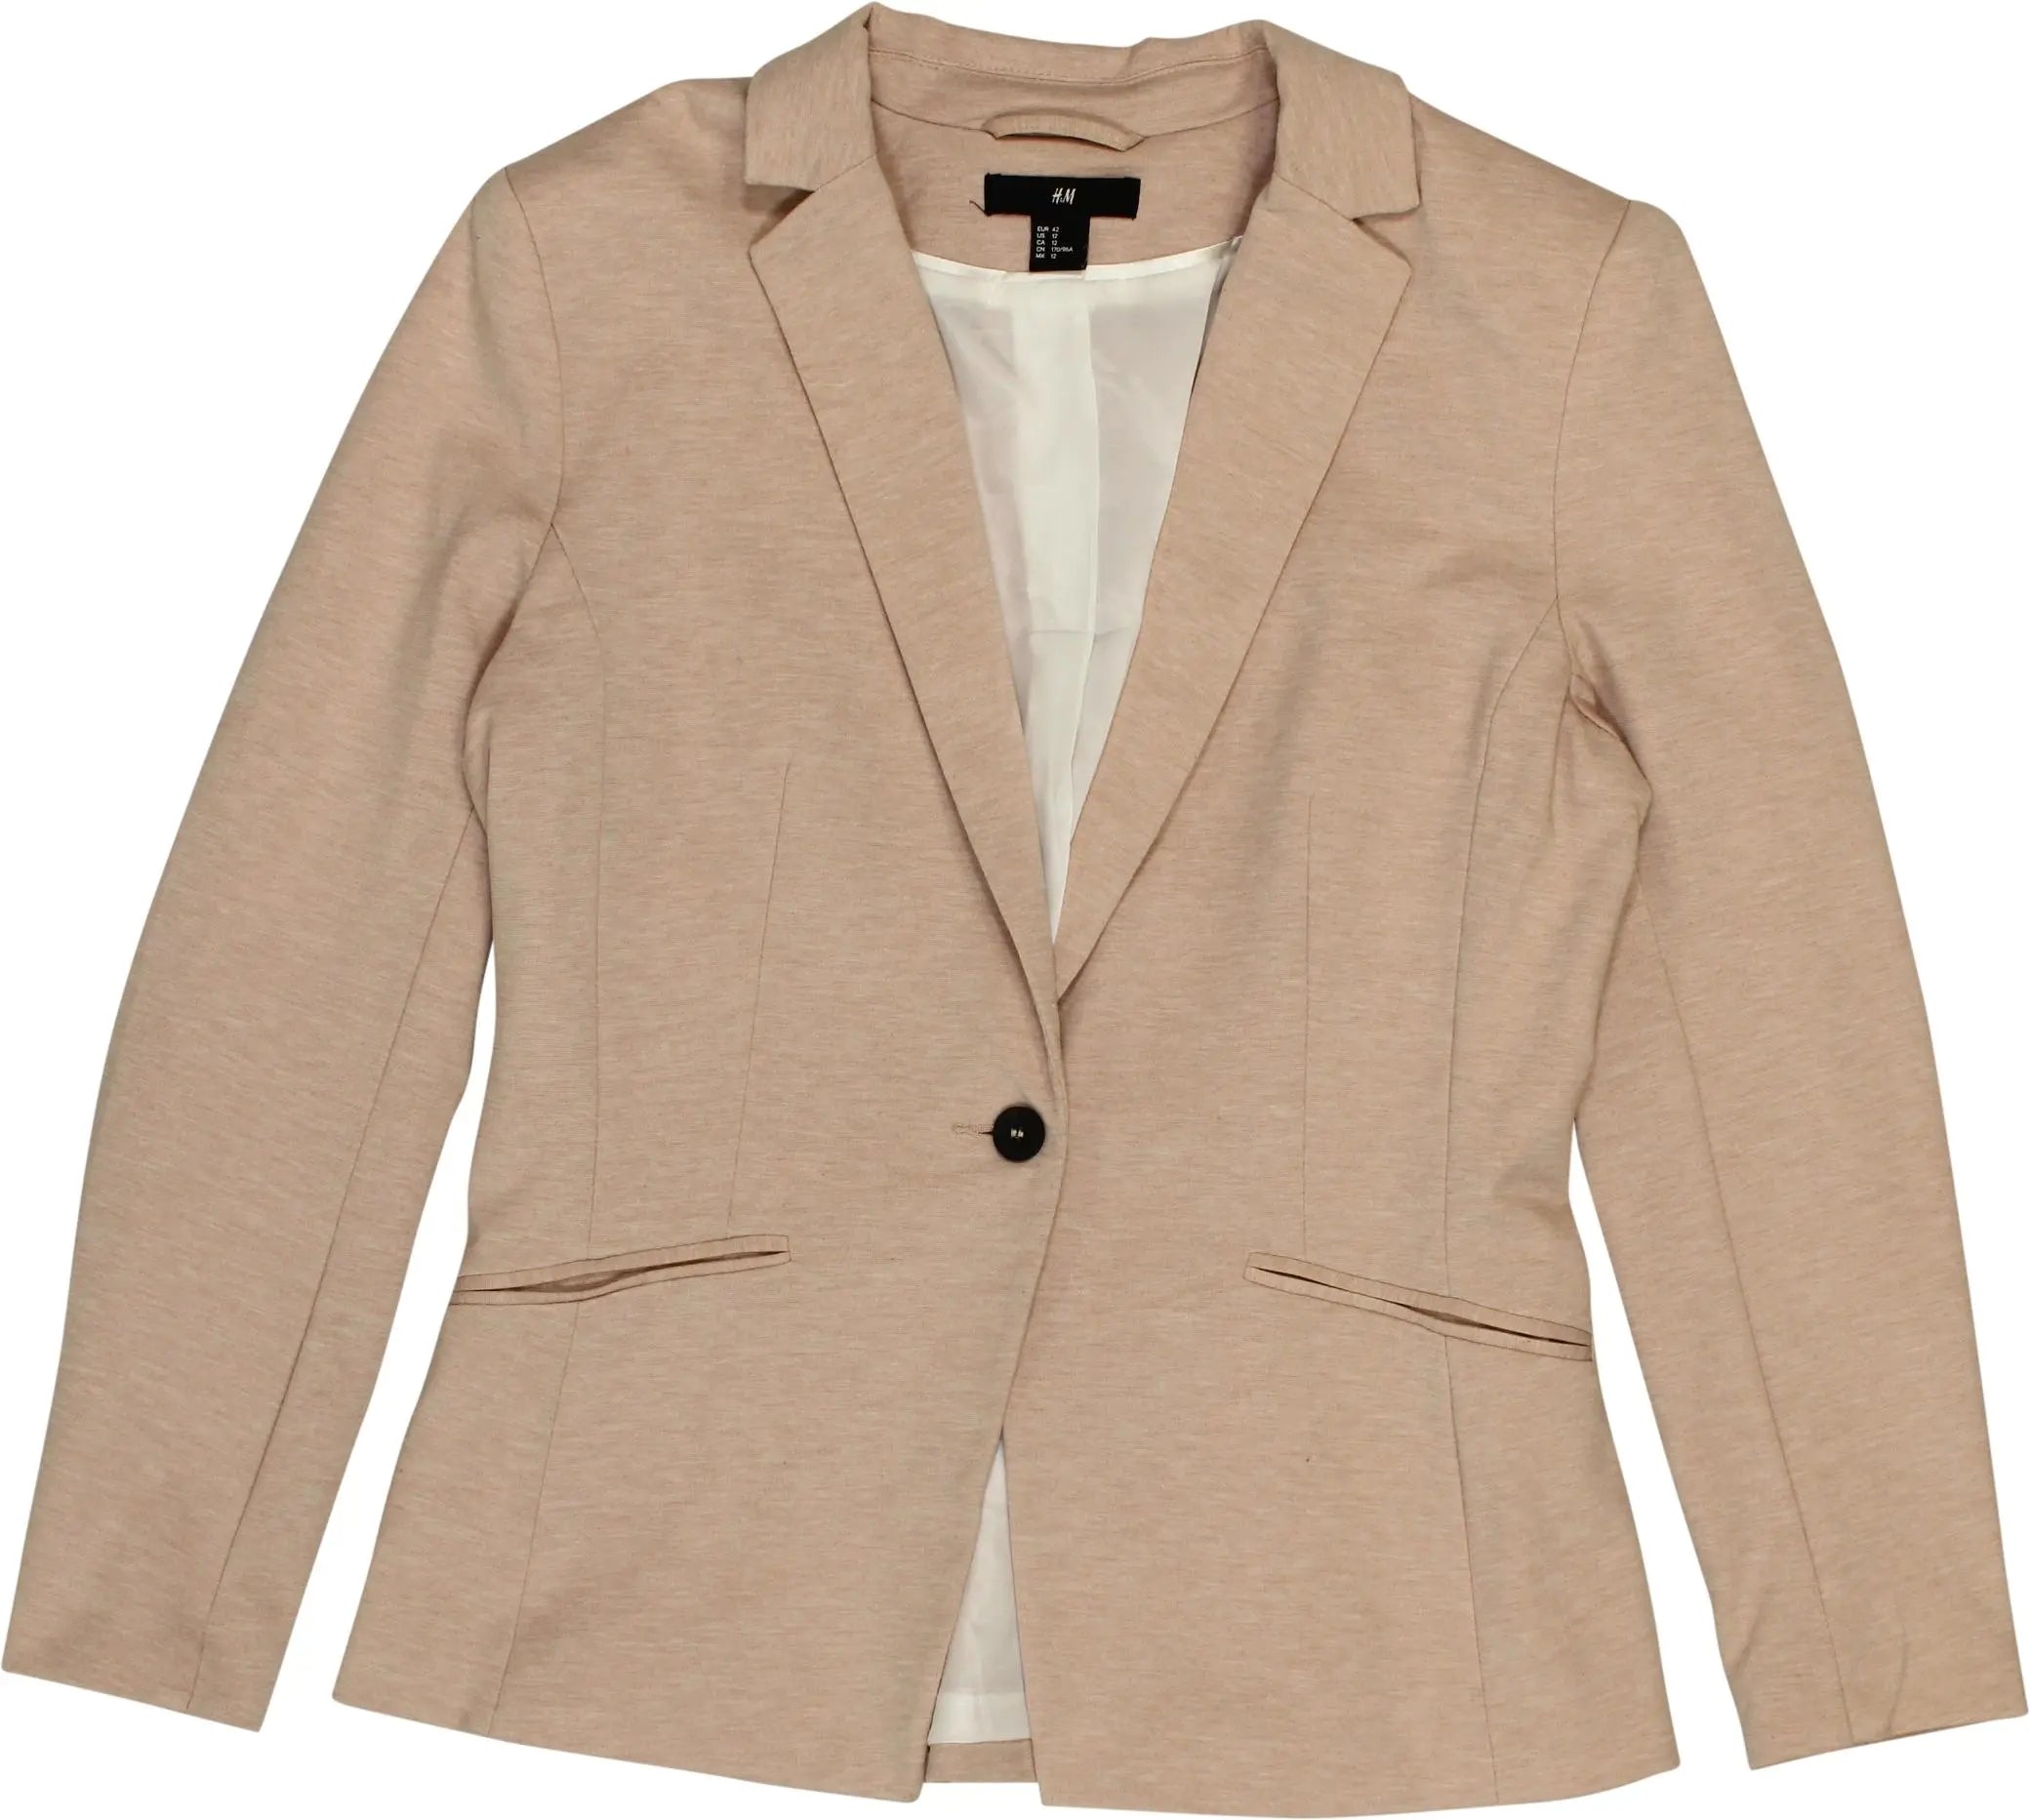 H&M - Pink Blazer- ThriftTale.com - Vintage and second handclothing